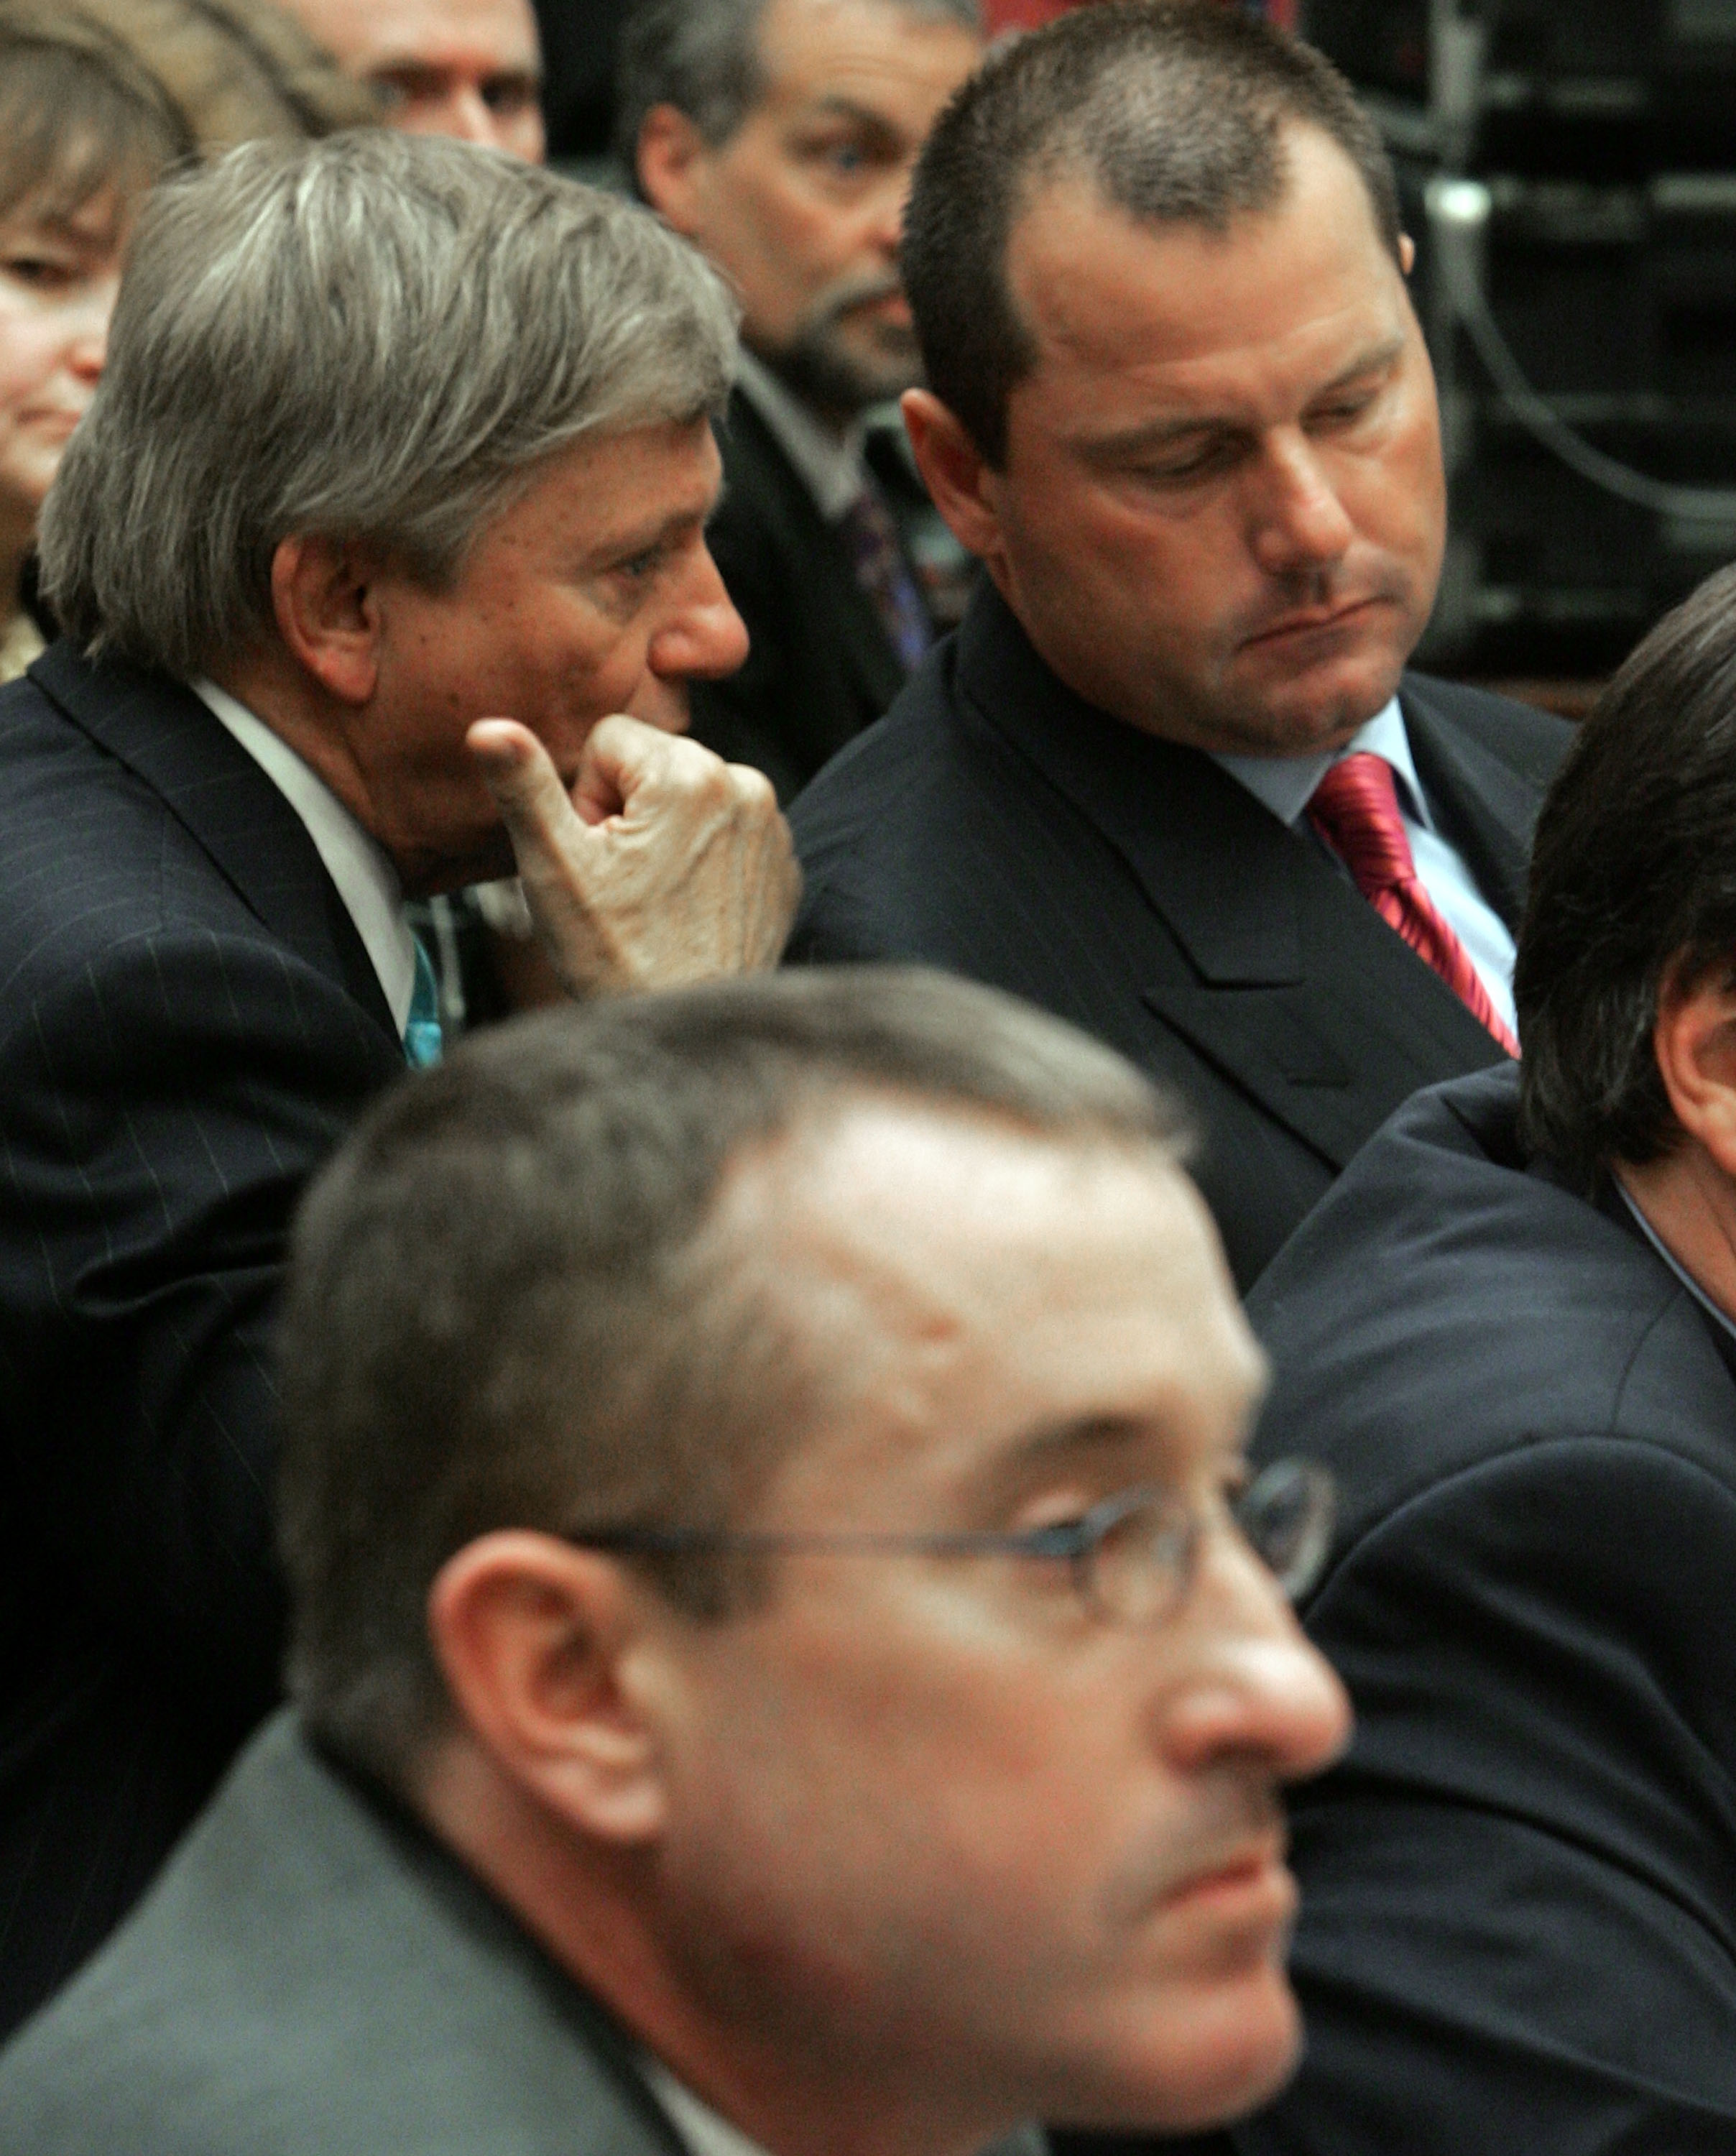 WASHINGTON - FEBRUARY 13:  Major League Baseball player Roger Clemens (R) talks with his attorney Rusty Hardin (L) while Brian McNamee (C), former trainer, sits nearby during a House Oversight and Government Reform Committee hearing February 13, 2008 in W